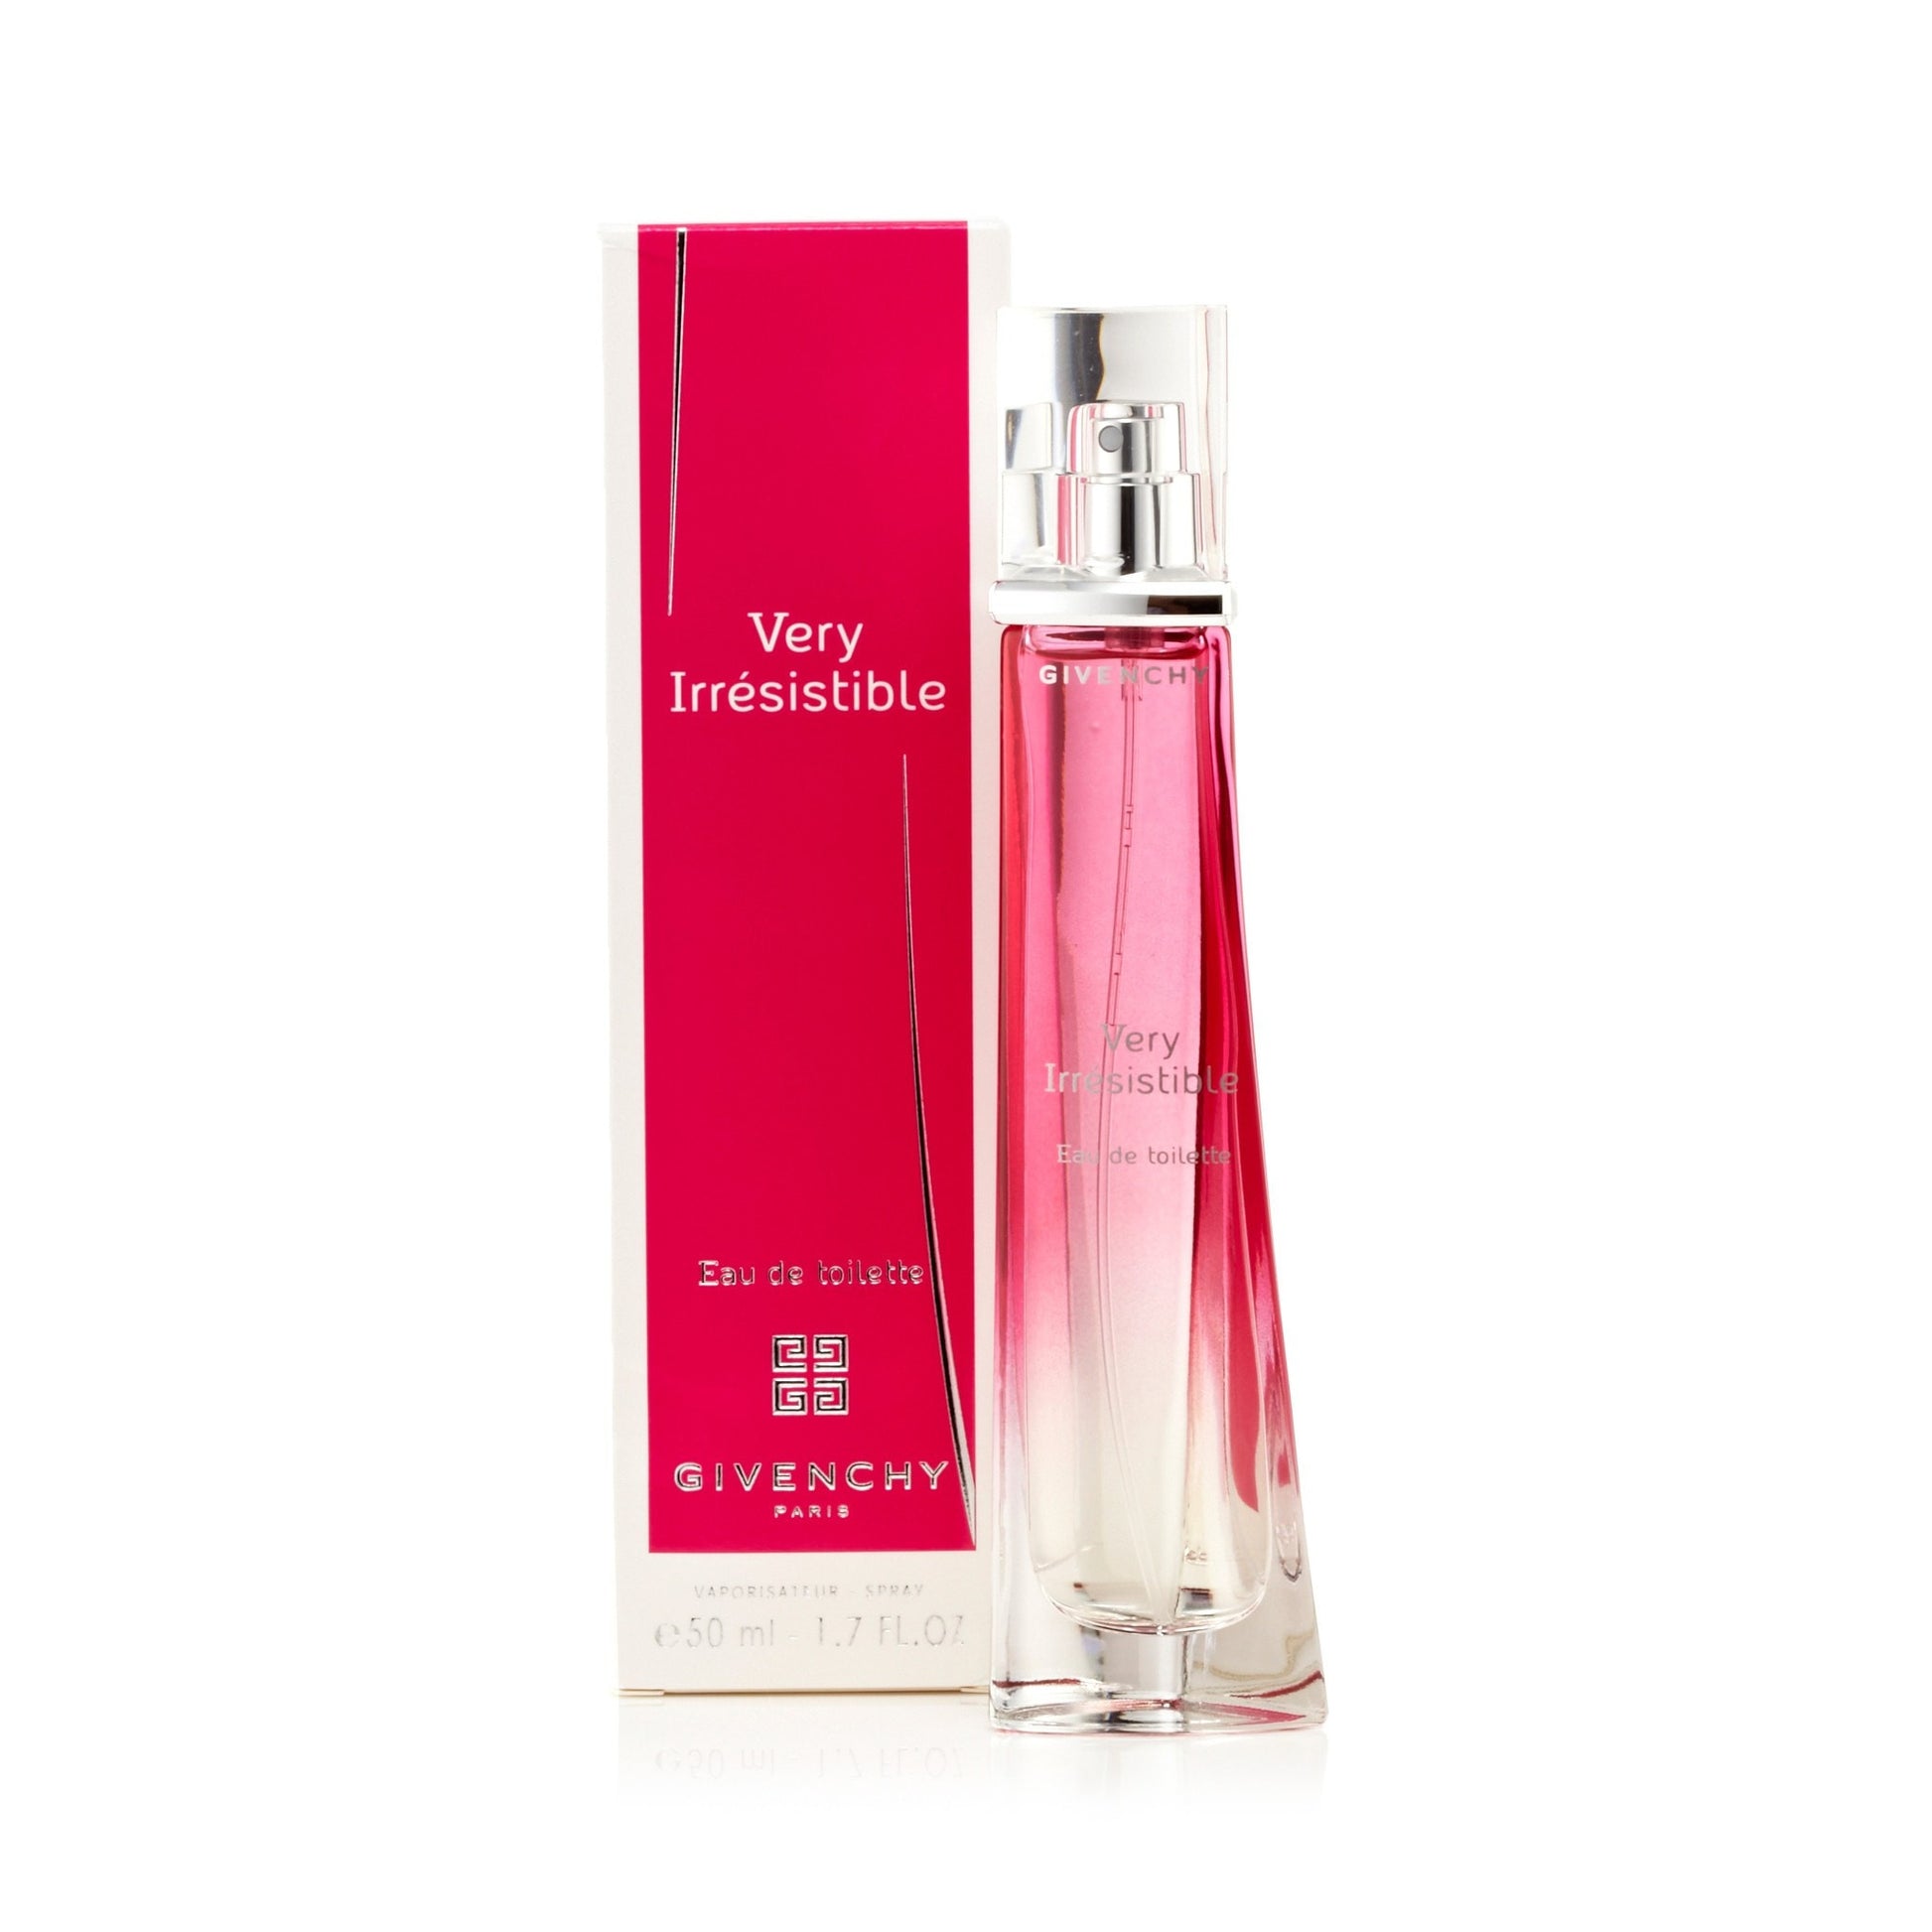  Very Irresistible Eau de Toilette Spray for Women by Givenchy 1.7 oz. Click to open in modal